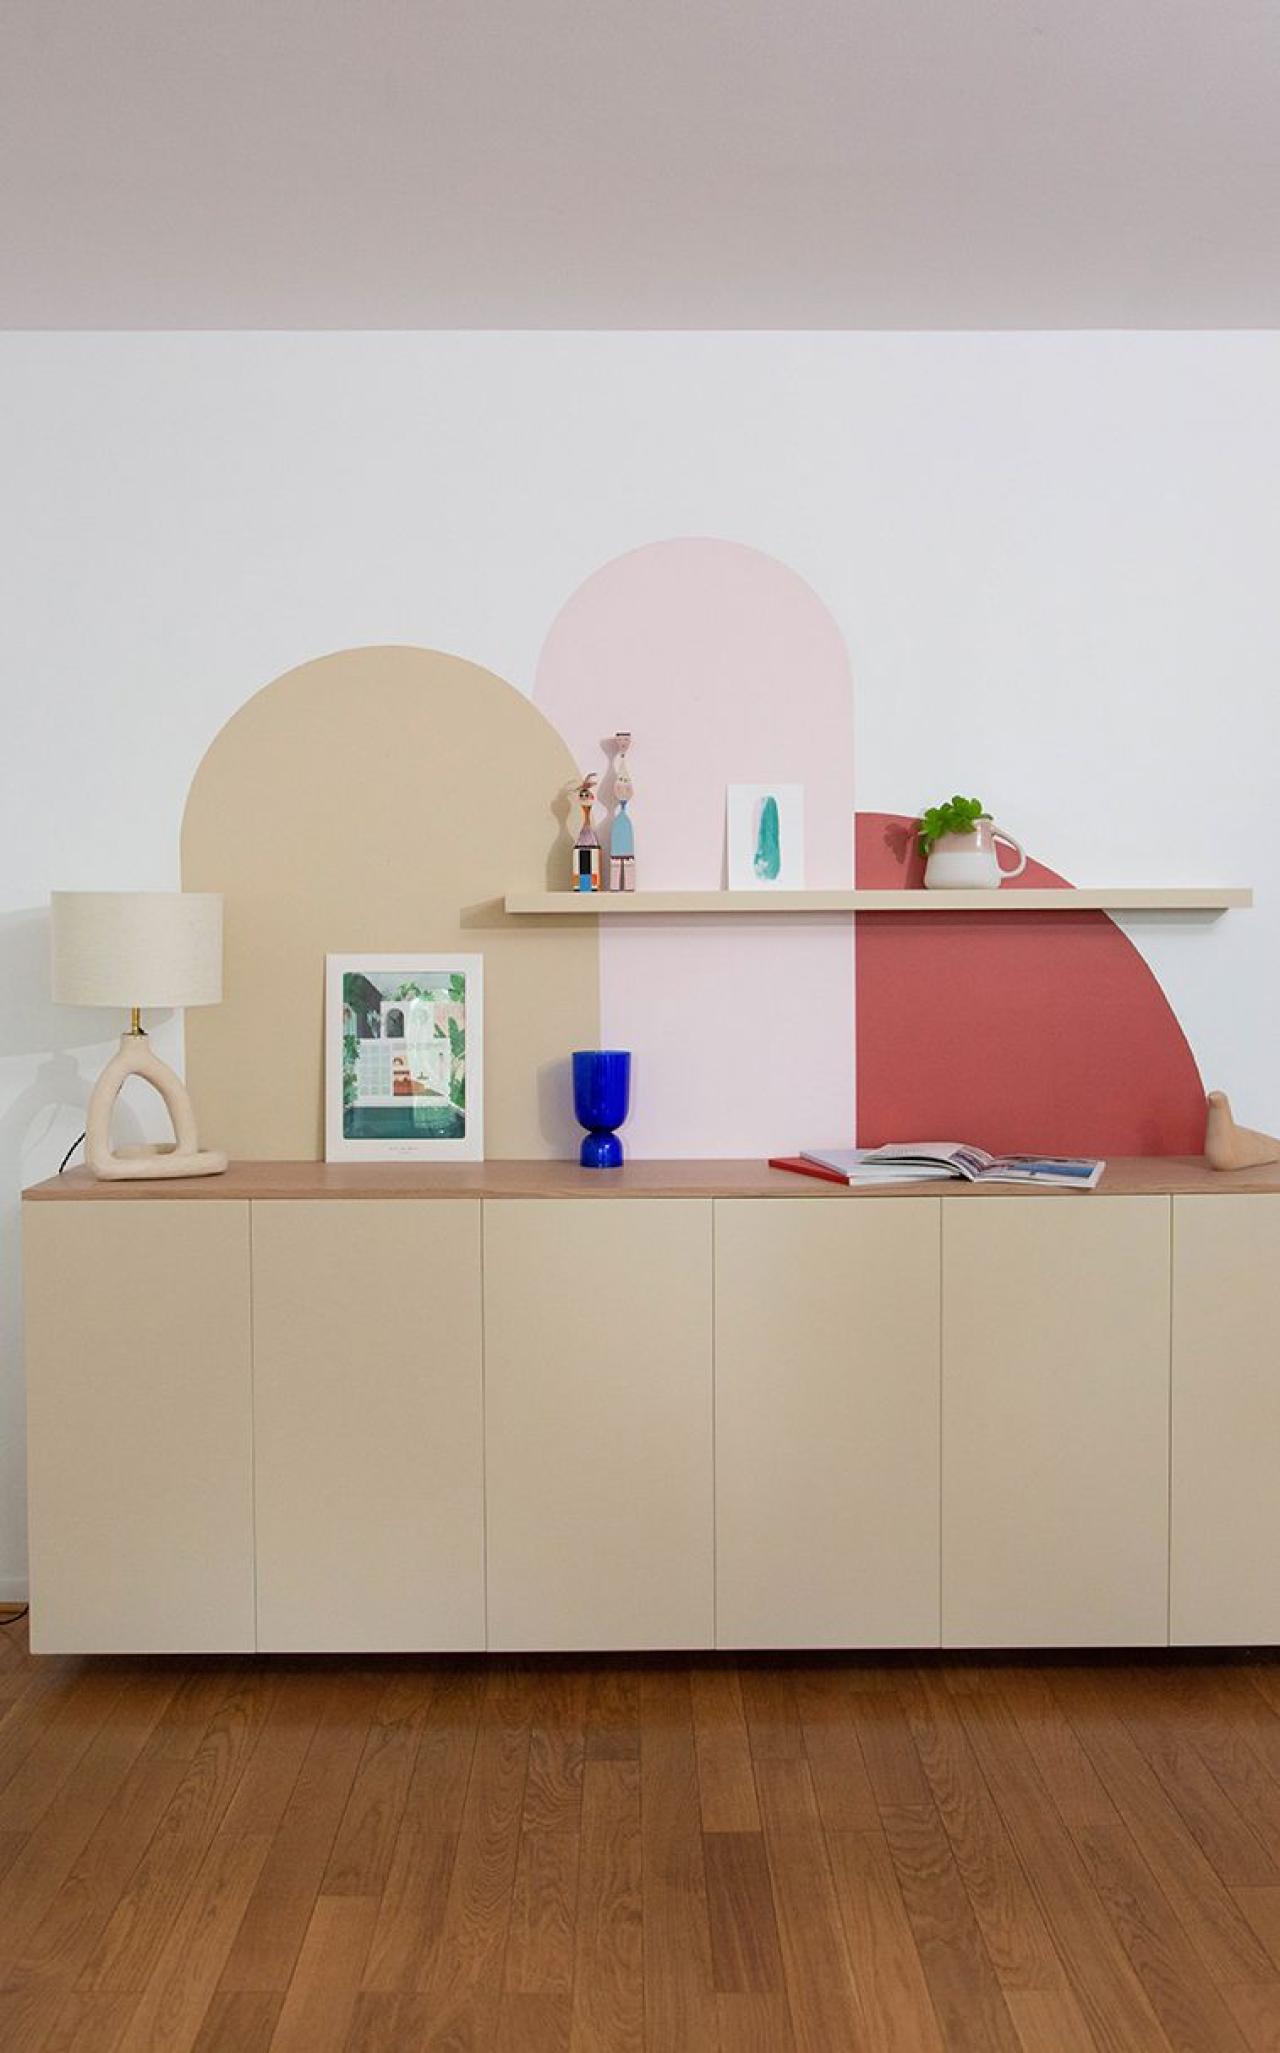 A Sable sideboard at Amandine & Nicolas' place